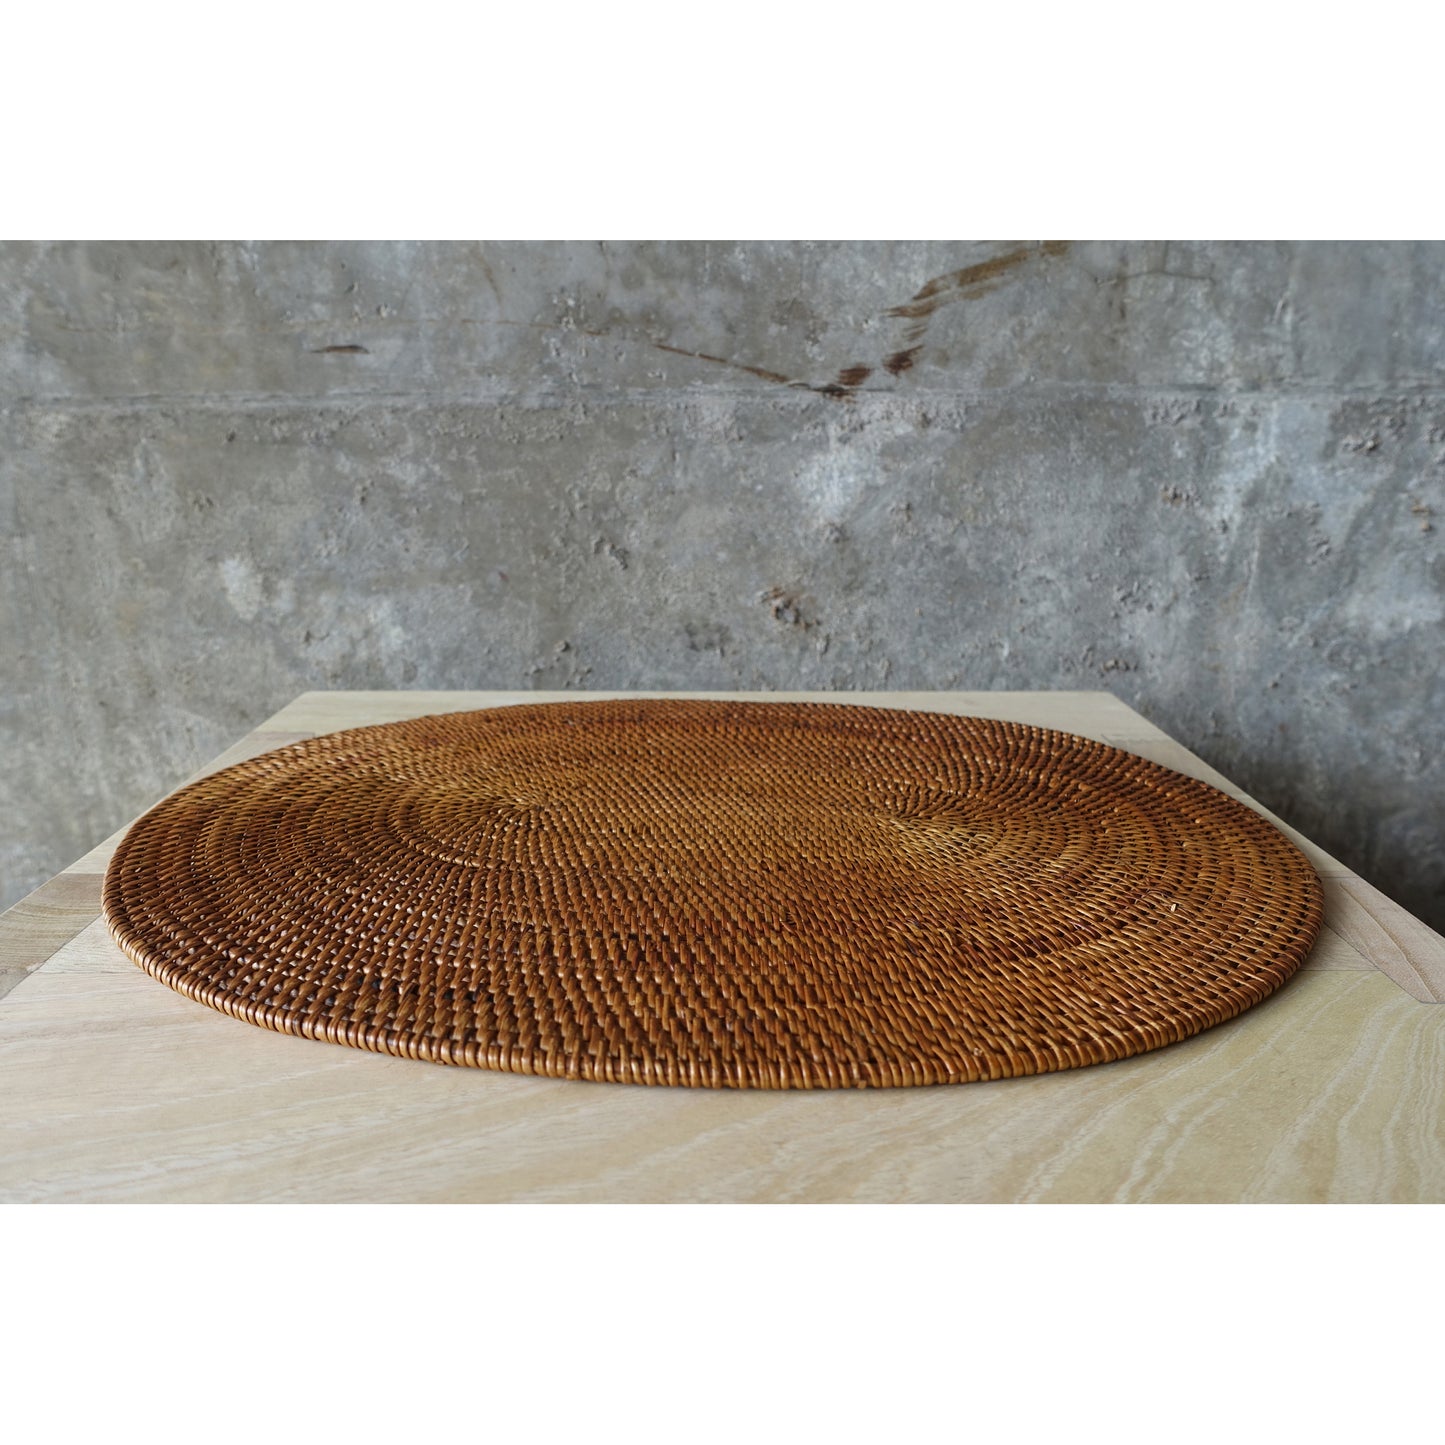 Woven Ata Reed Placemat - Oval